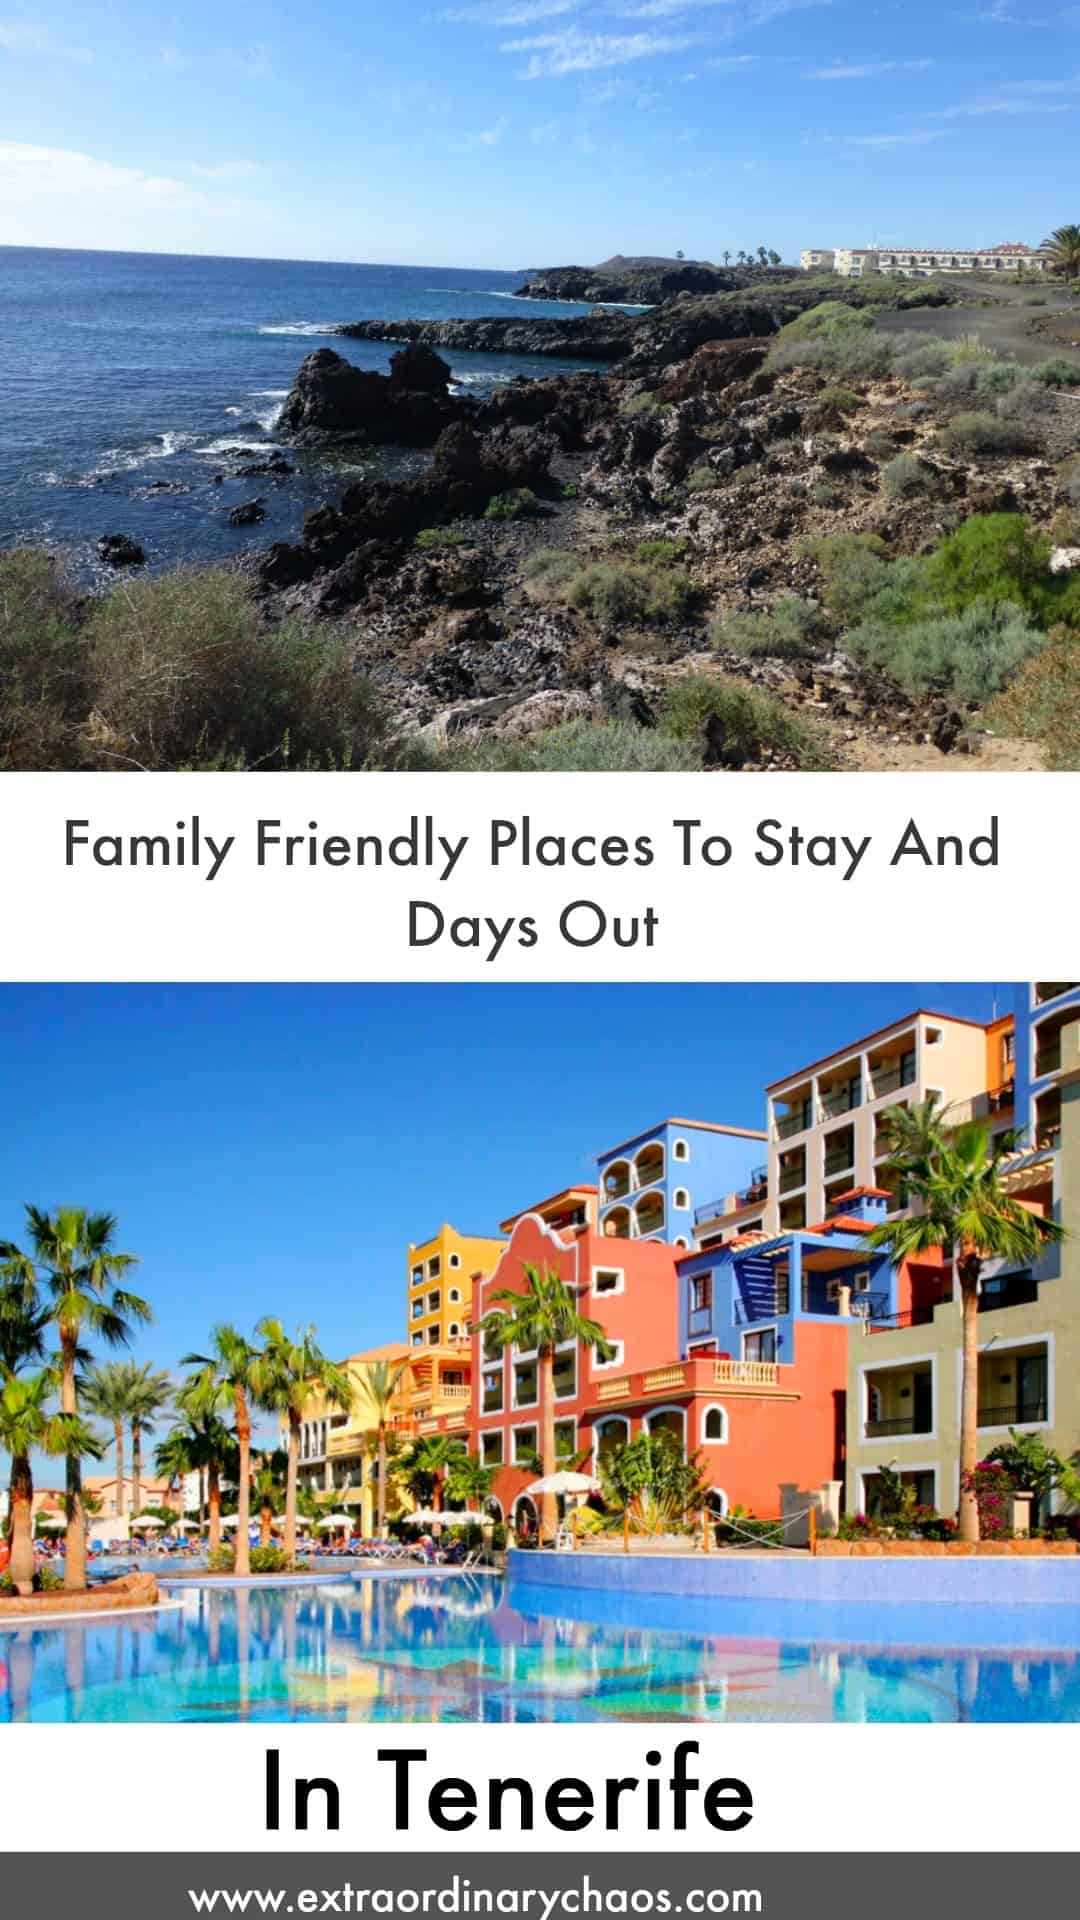 Visiting Tenerife in Spain, check out my guide of family friendly places to visit and stay in Tenerife.